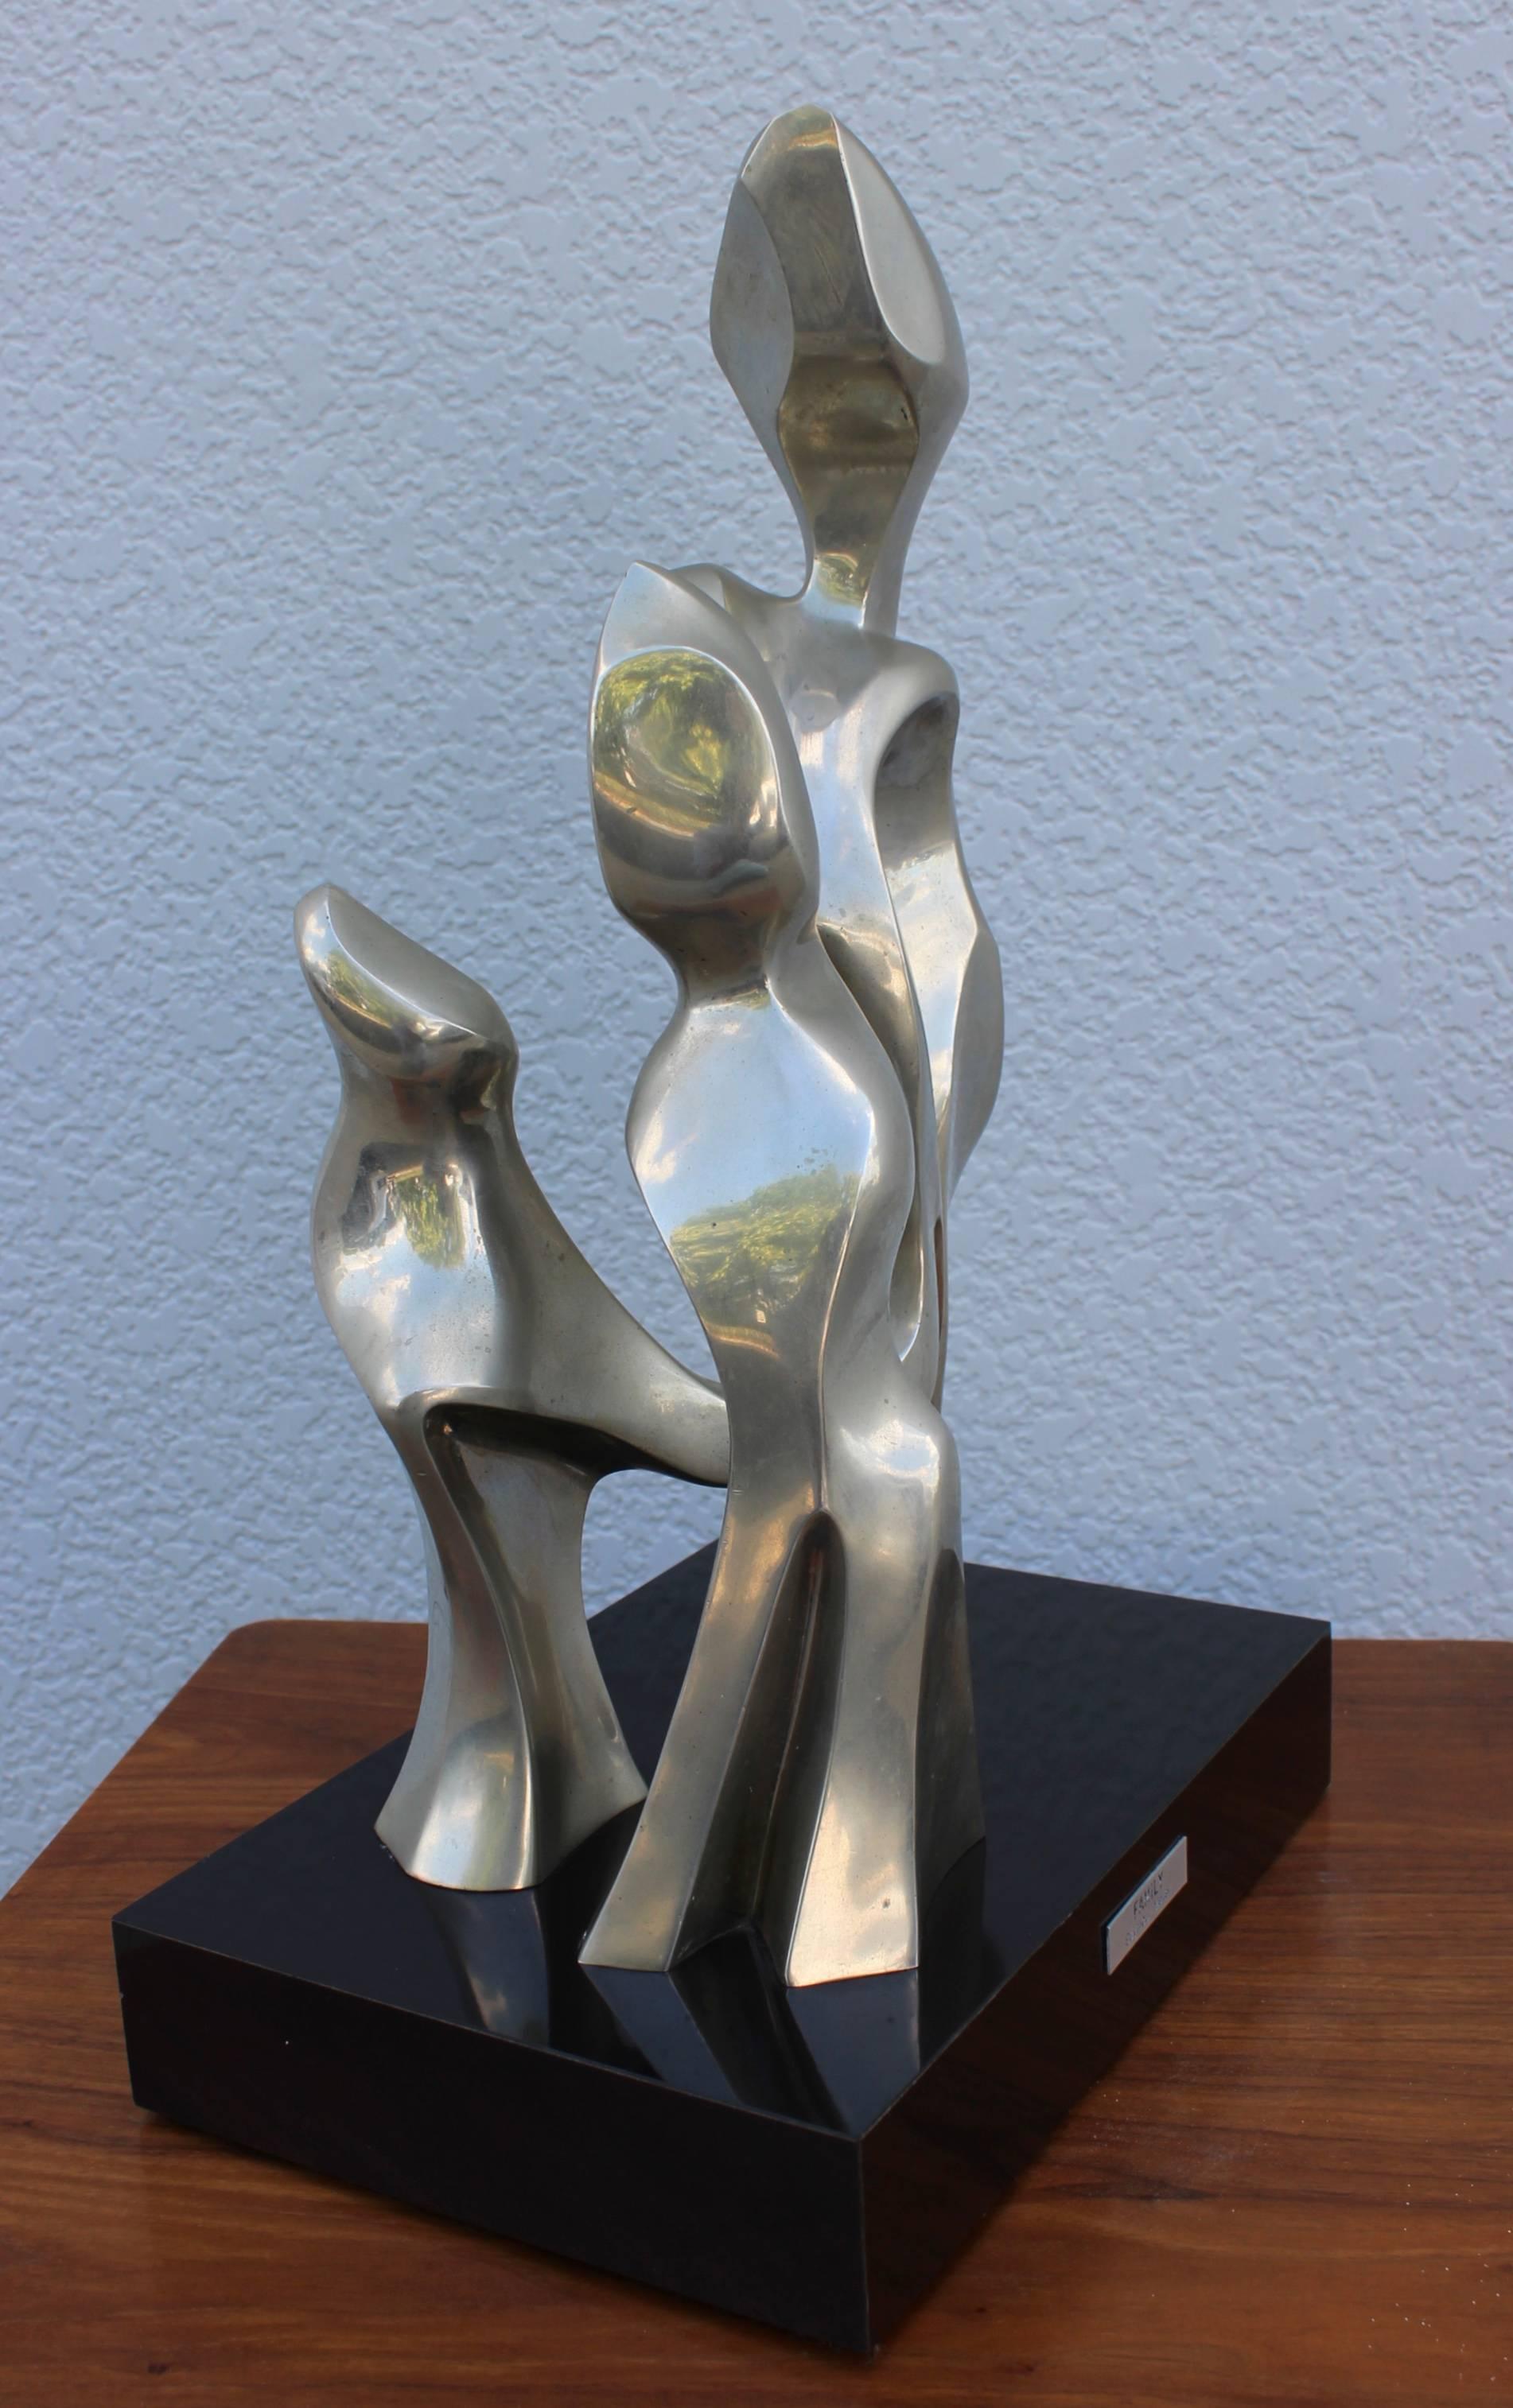 Stunning solid bronze sculpture by Seymour Meyer, mounted on a acrylic swivel base. Signed and number 1/9.